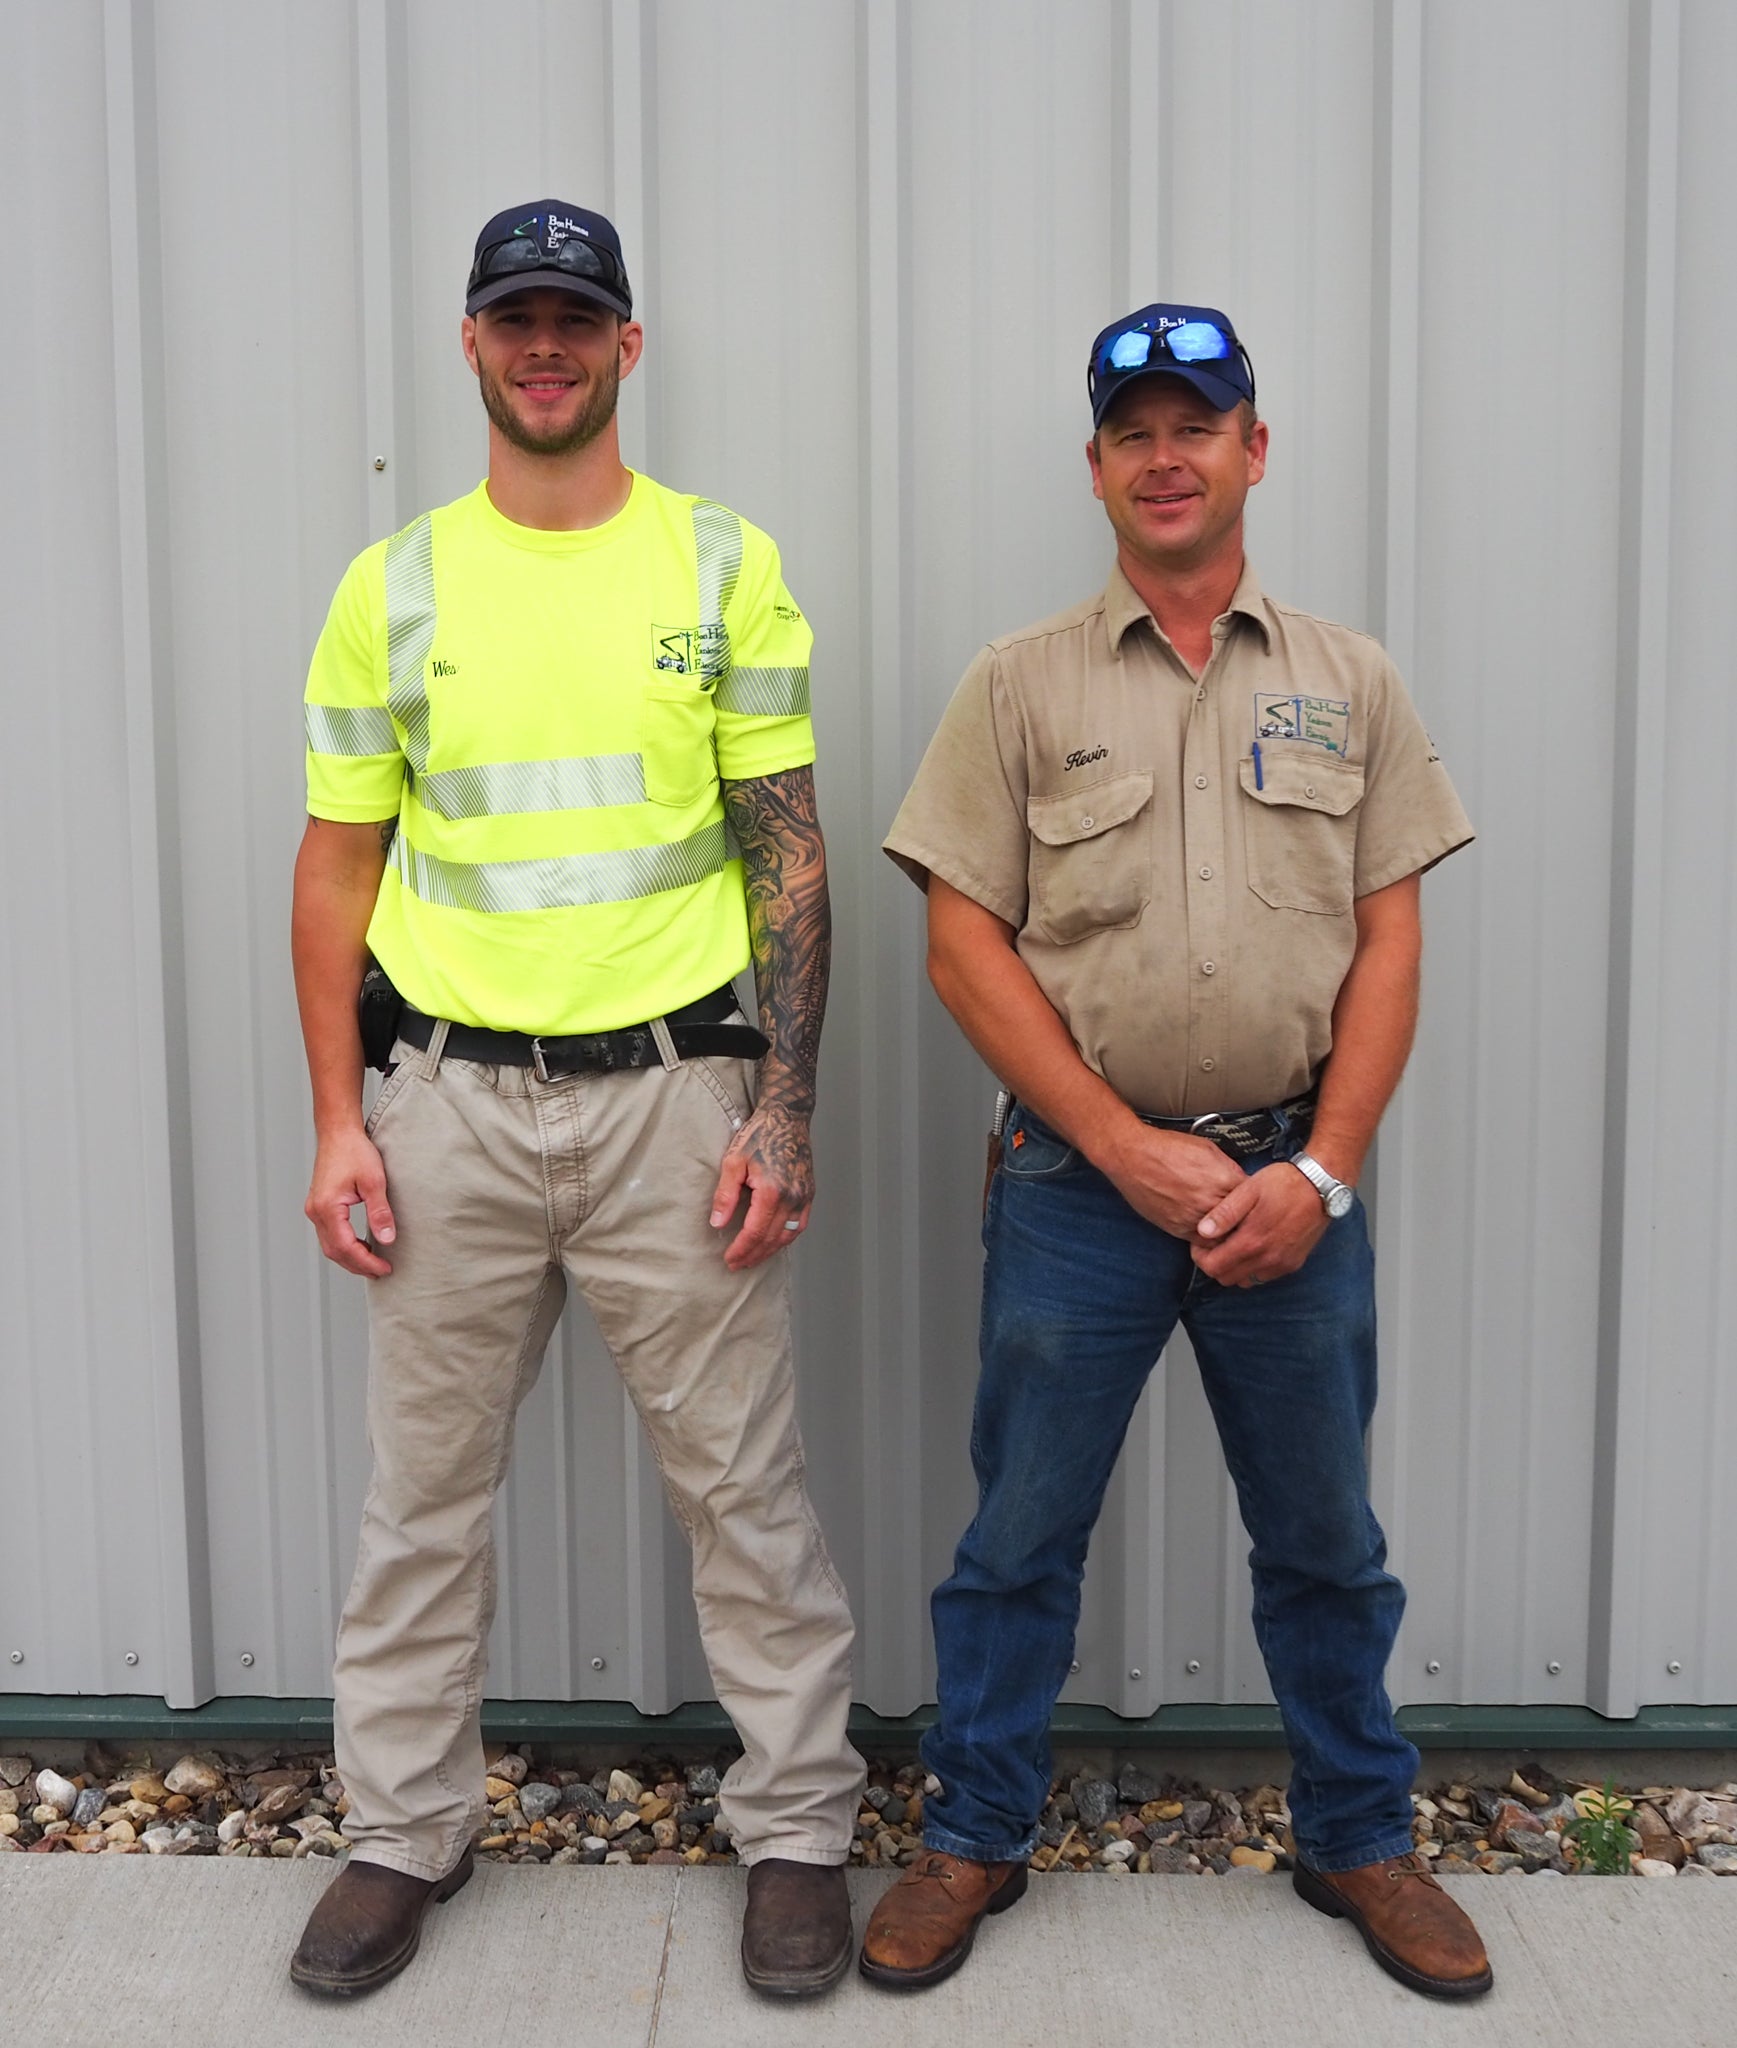 Our electricians Kevin Meyer and Wes Kloucek